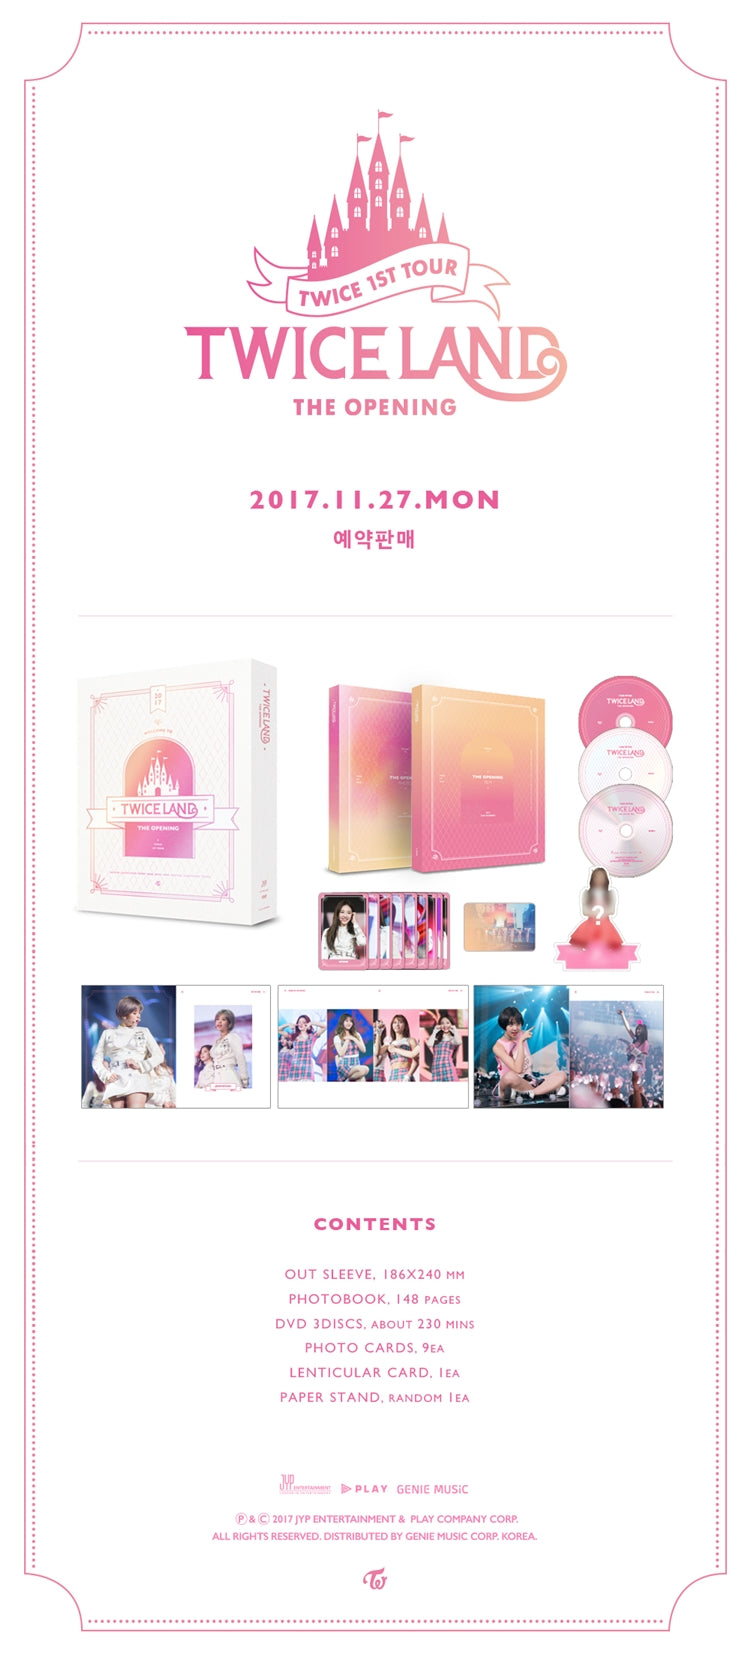 3 DVD
1 Photo Book (148 pages)
9 Photo Cards
1 Lenticular Card
1 Paper Stand